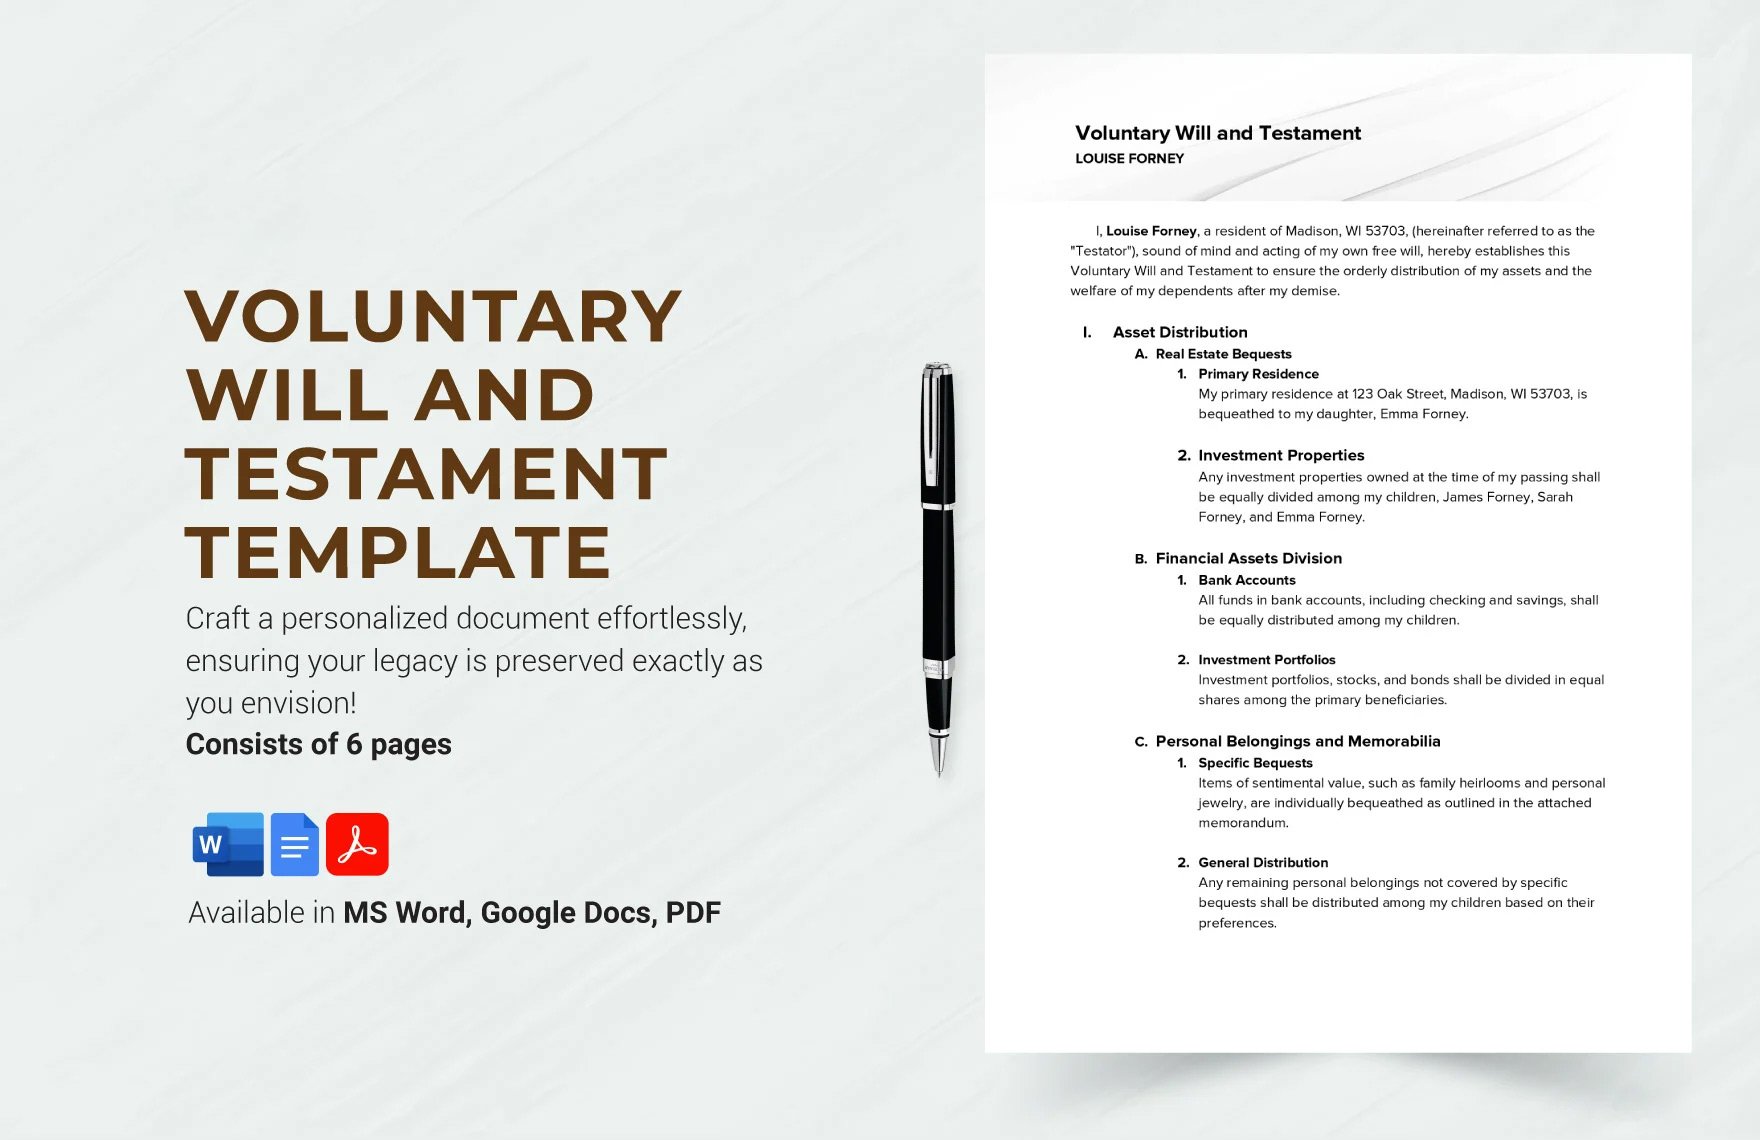 Voluntary Will and Testament Template